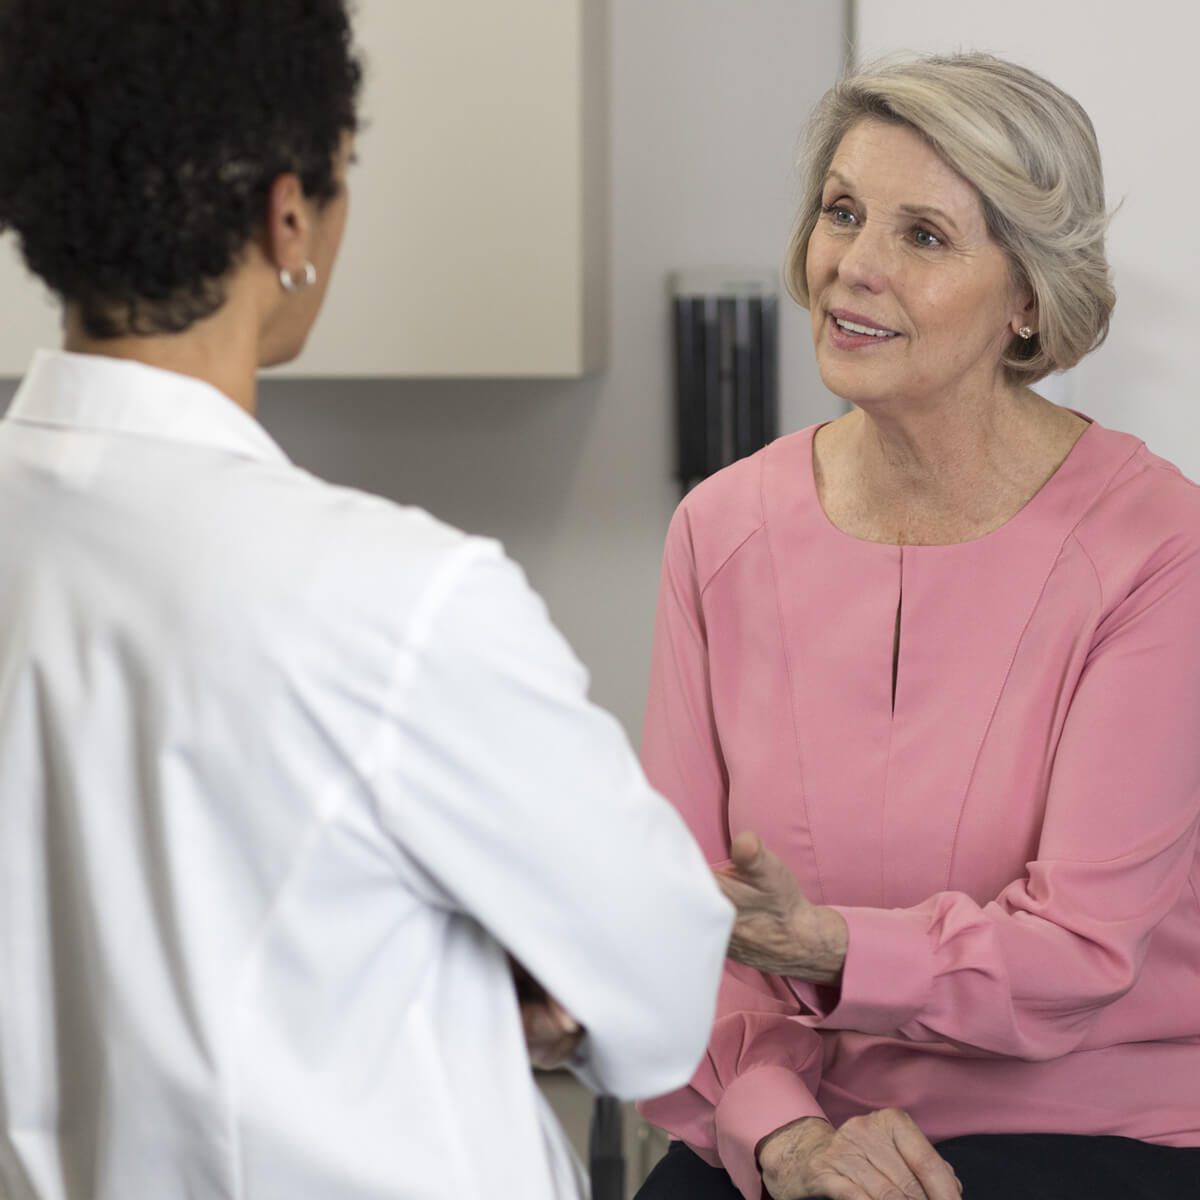 A physician discusses health opportunities based on data from the Care Decision Insight program with a patient.